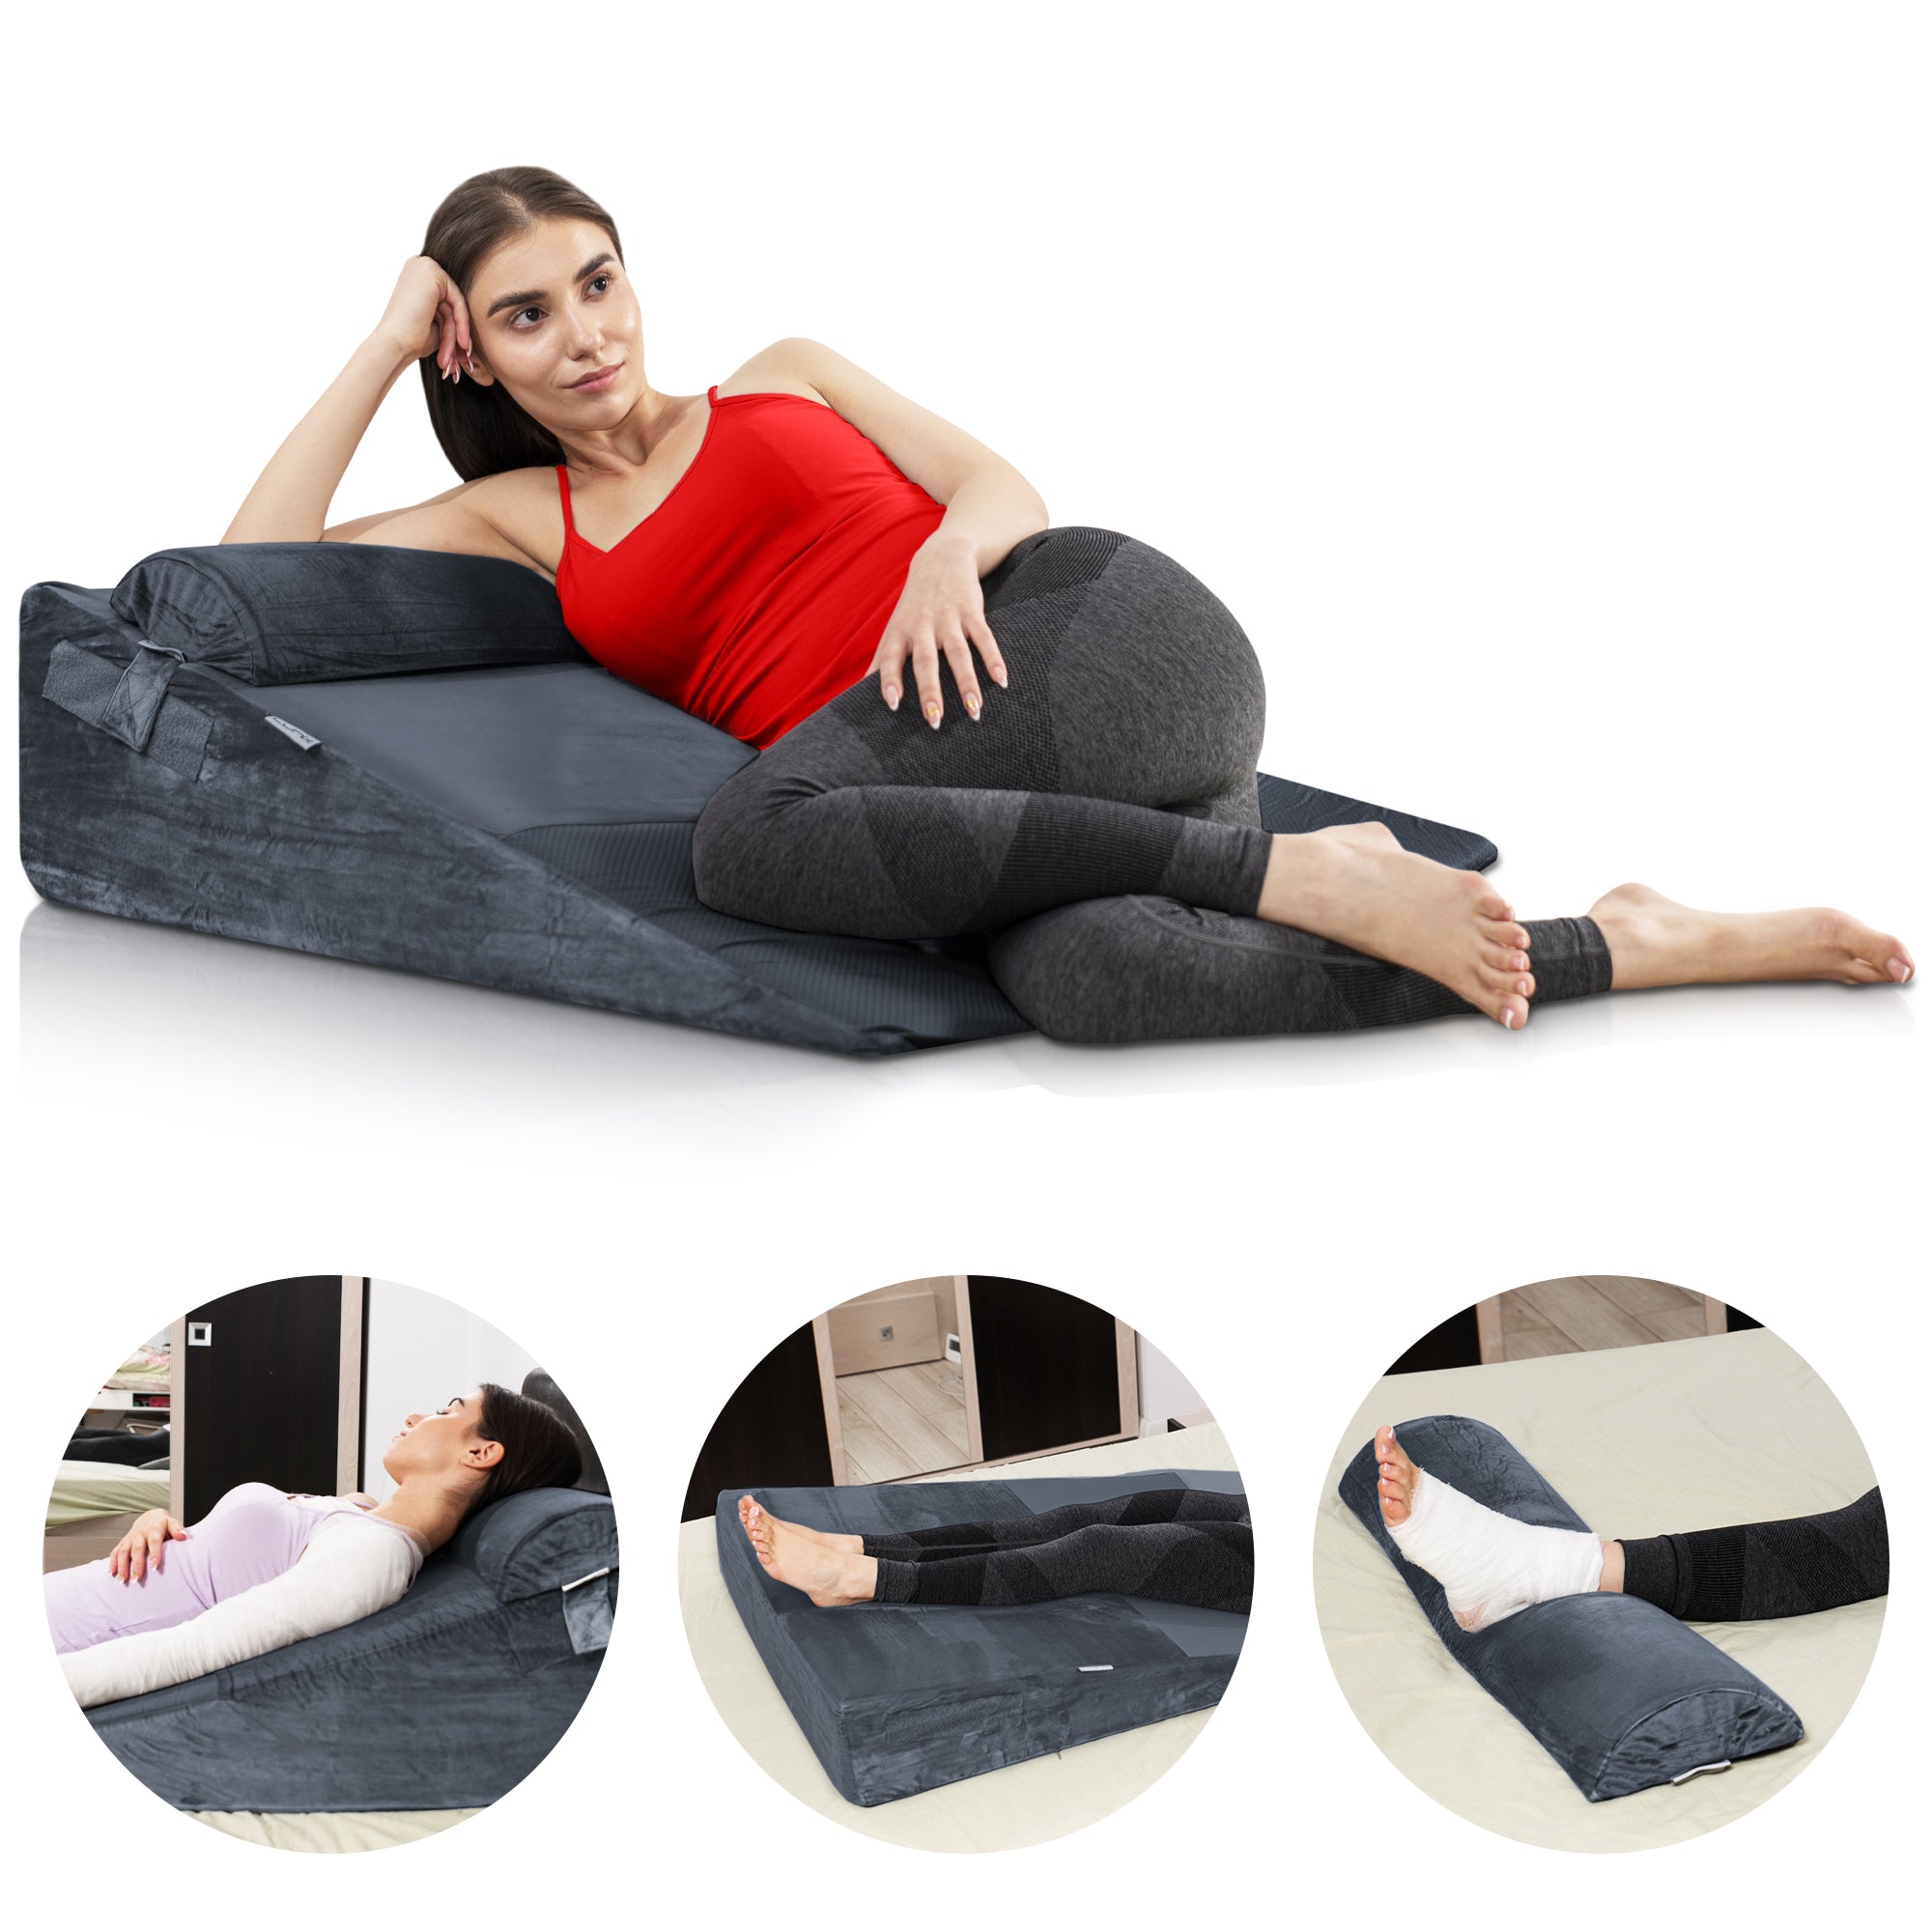 LX9 Extra Large Orthopedic Bed Wedge Pillow System 35x32x7.5 Gray - Lunixinc